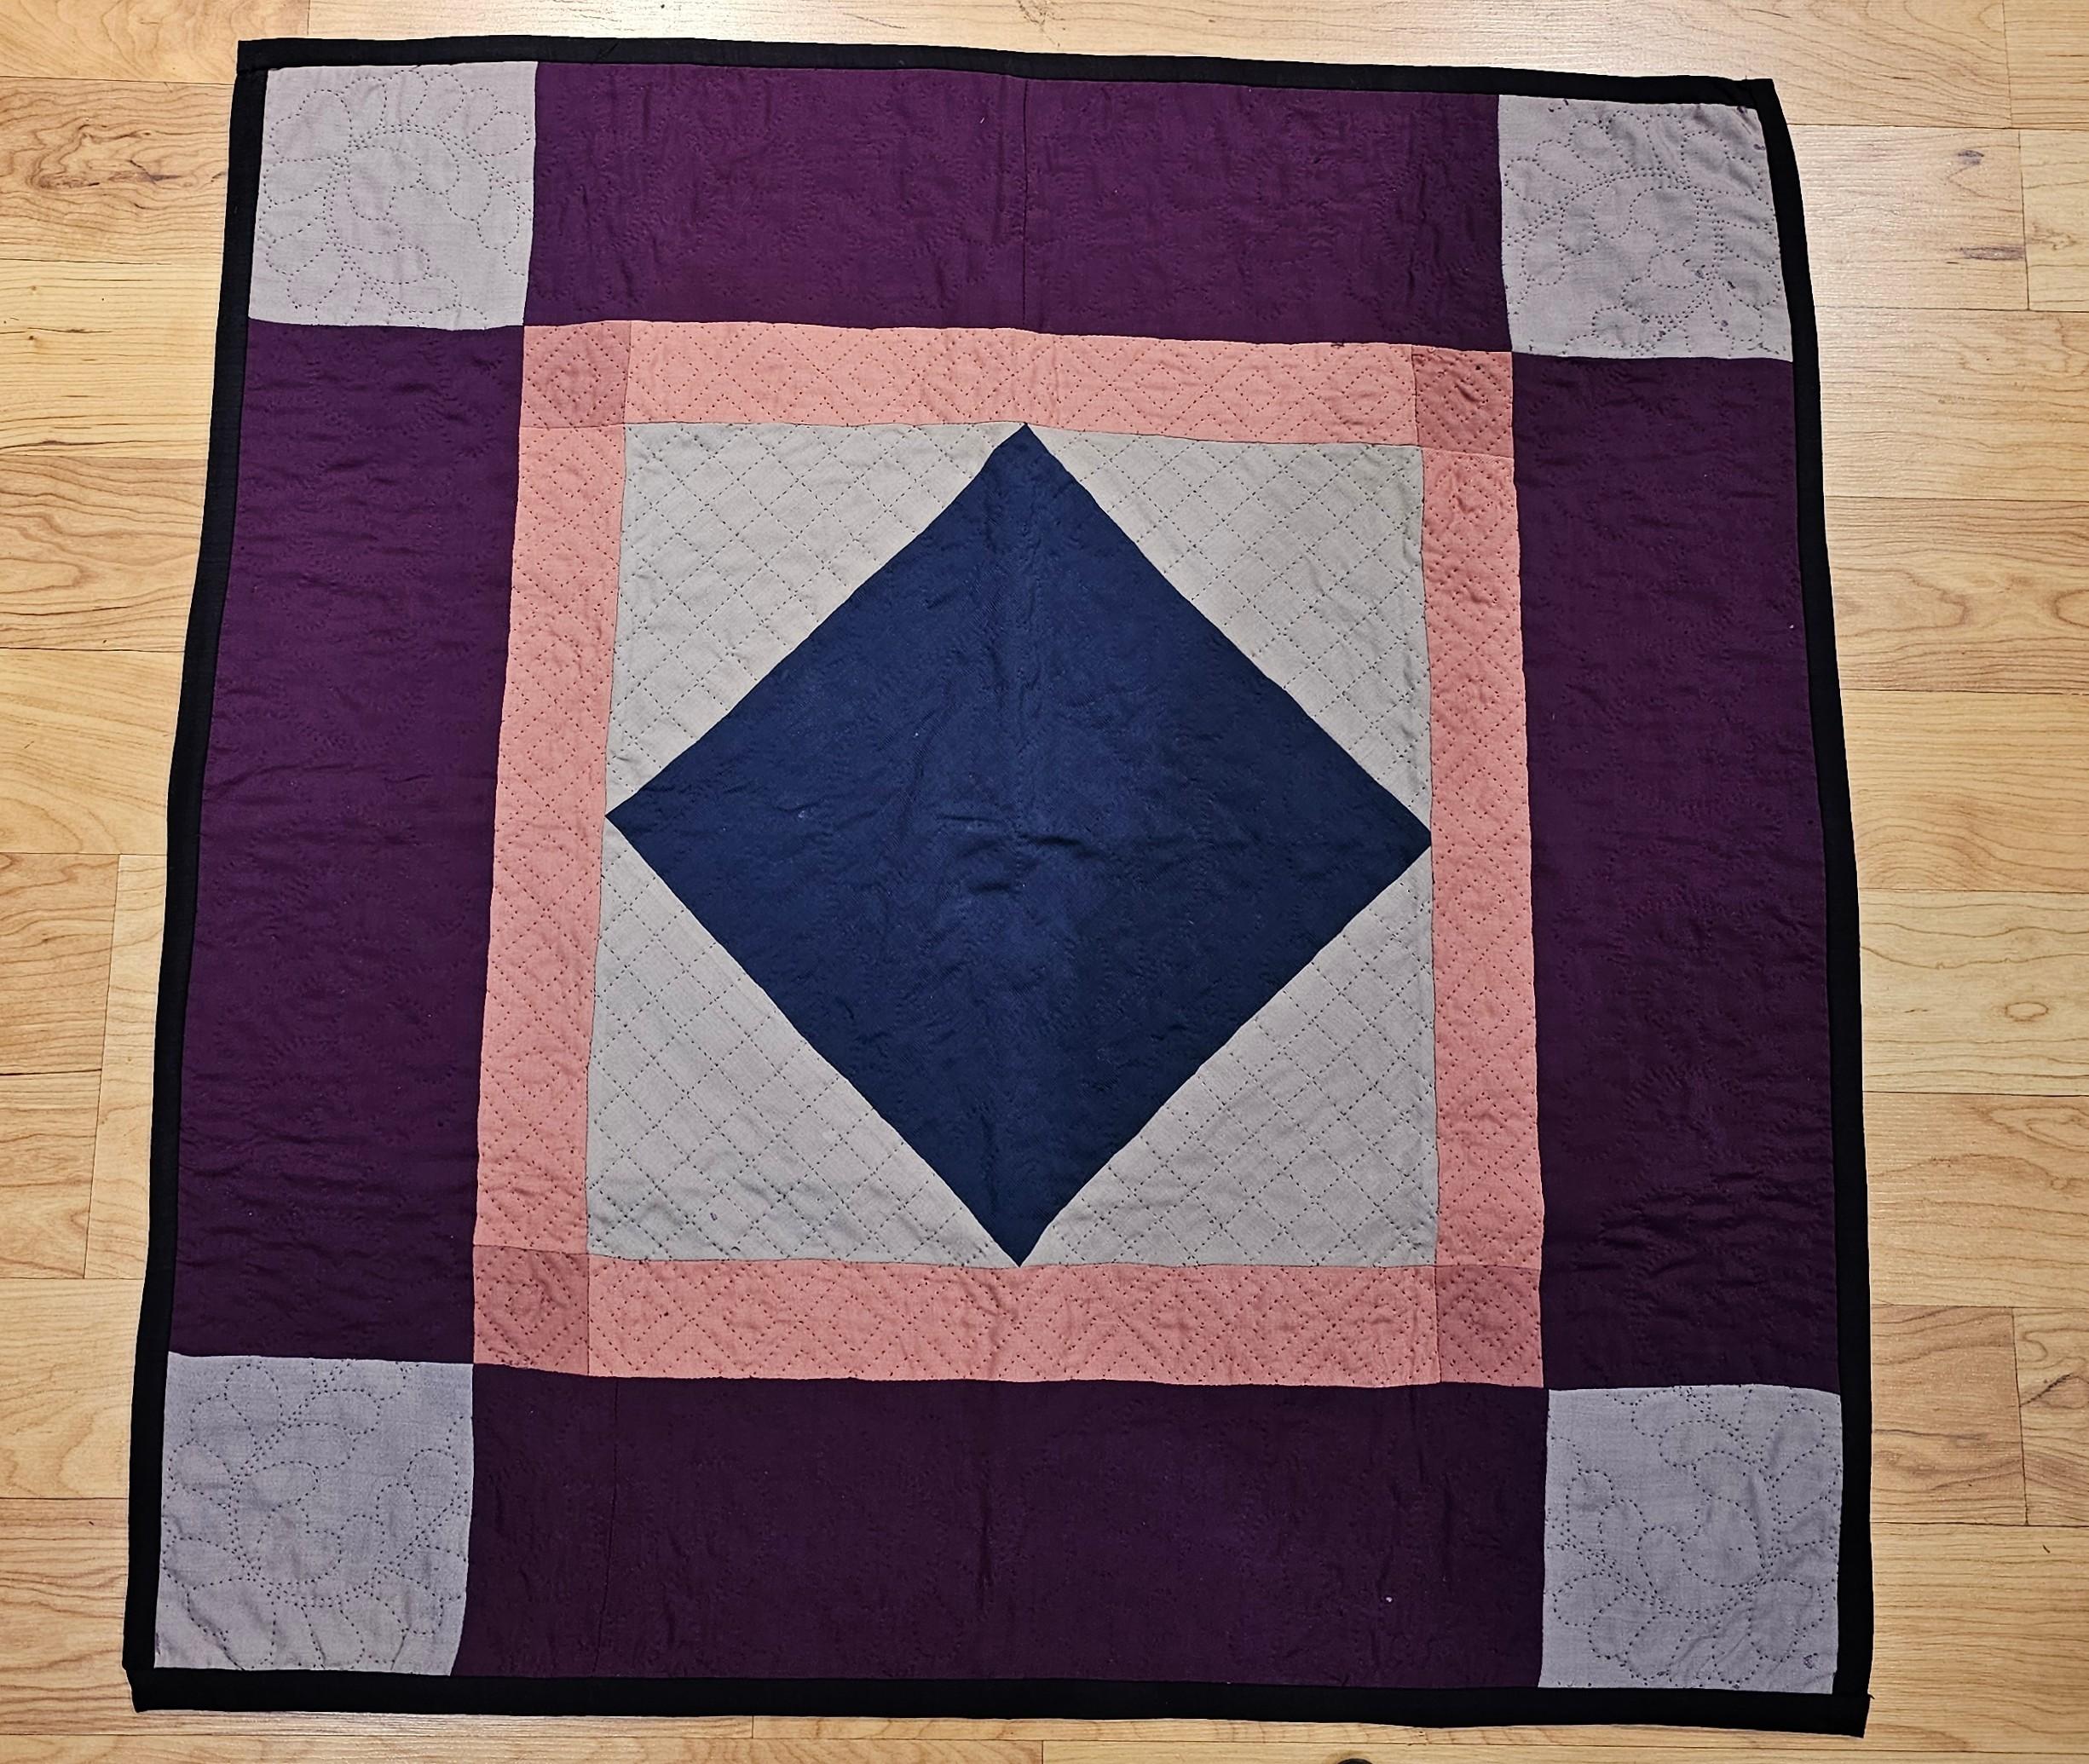  19th century hand-stitched and quilted American Amish Crib Quilt in a” Diamond in a Square” pattern from Lancaster County, Pennsylvania.   The quilt has a very fine hand stitching with primary colors of ivory, pink, burgundy, and navy blue.  The